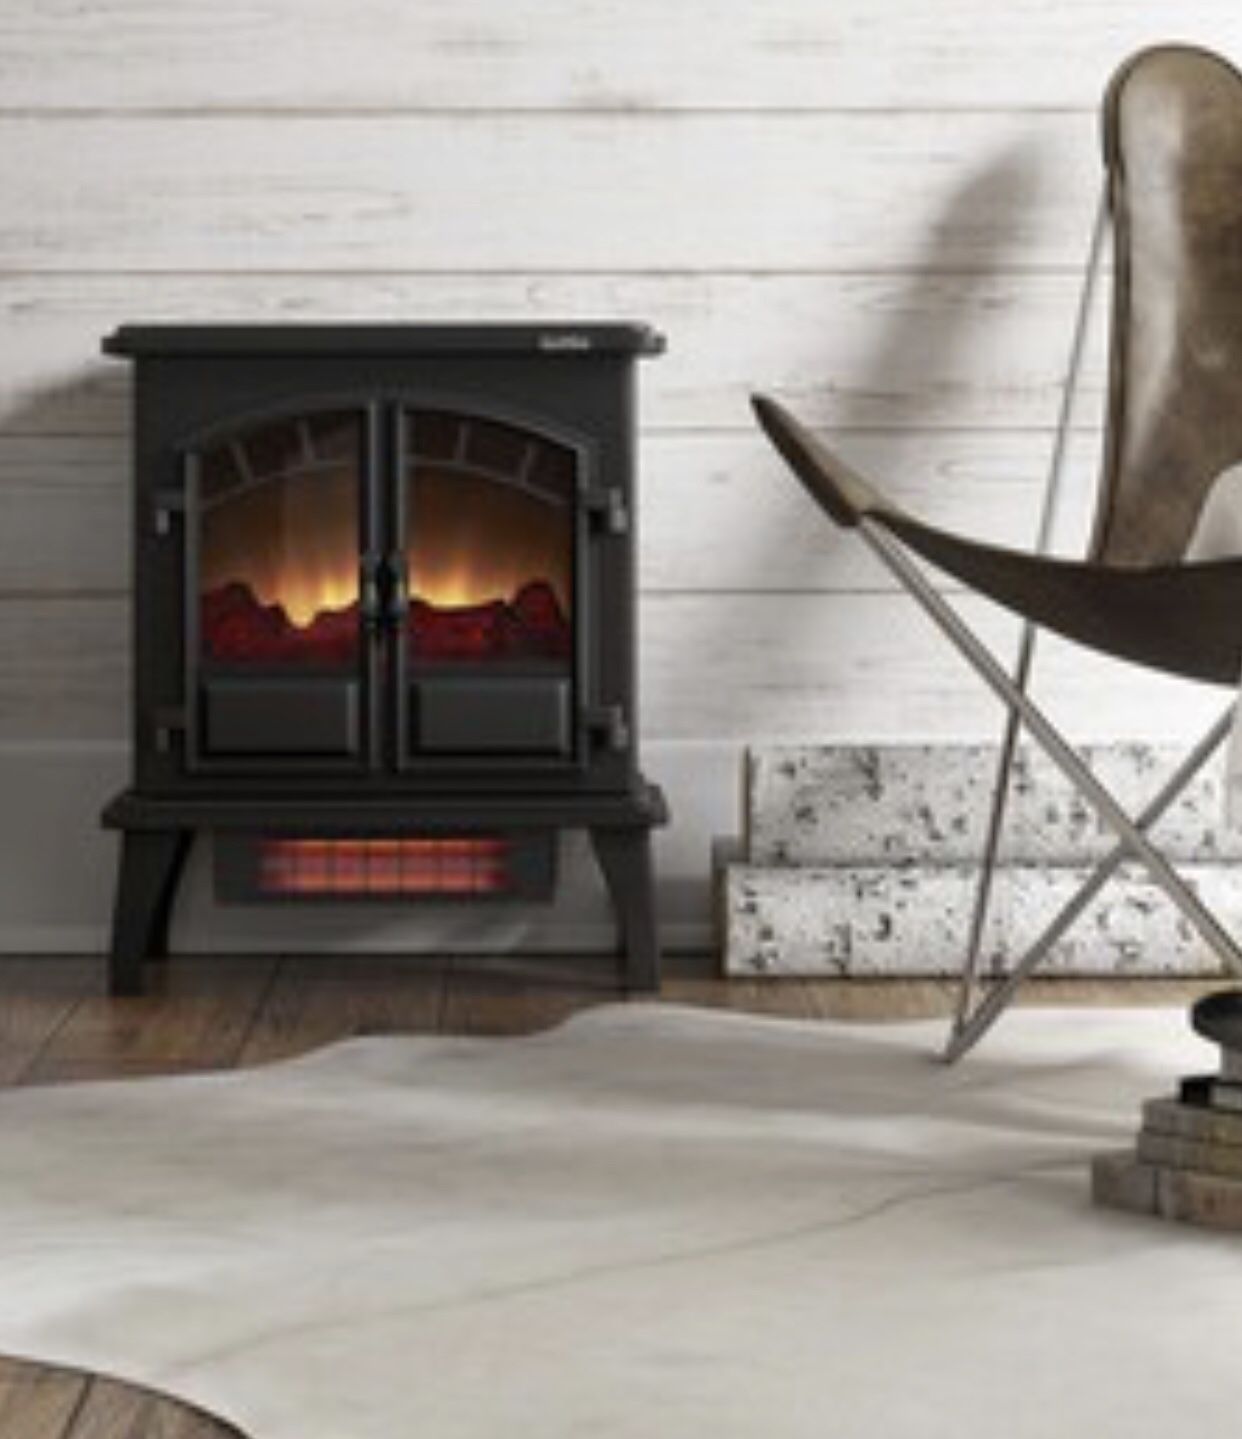 New - 5200-BTU Infrared Fireplace with Thermostat